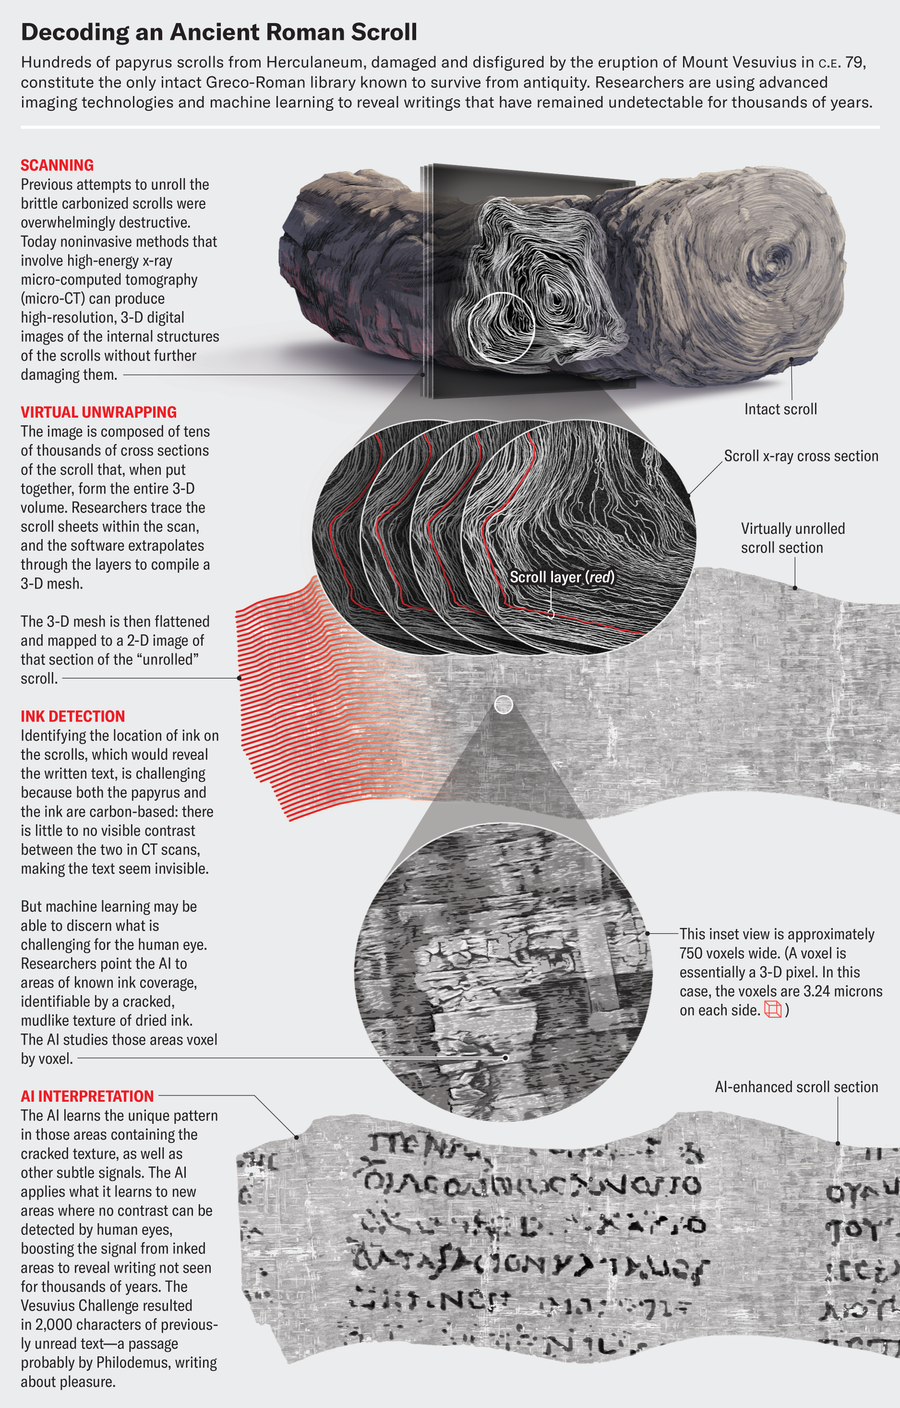 Series of illustrations show how the contents of a carbonized papyrus scroll were revealed. High energy micro-CT scans were extrapolated into a 3-D mesh which was then flattened. Researchers pointed AI to areas of known ink coverage. 